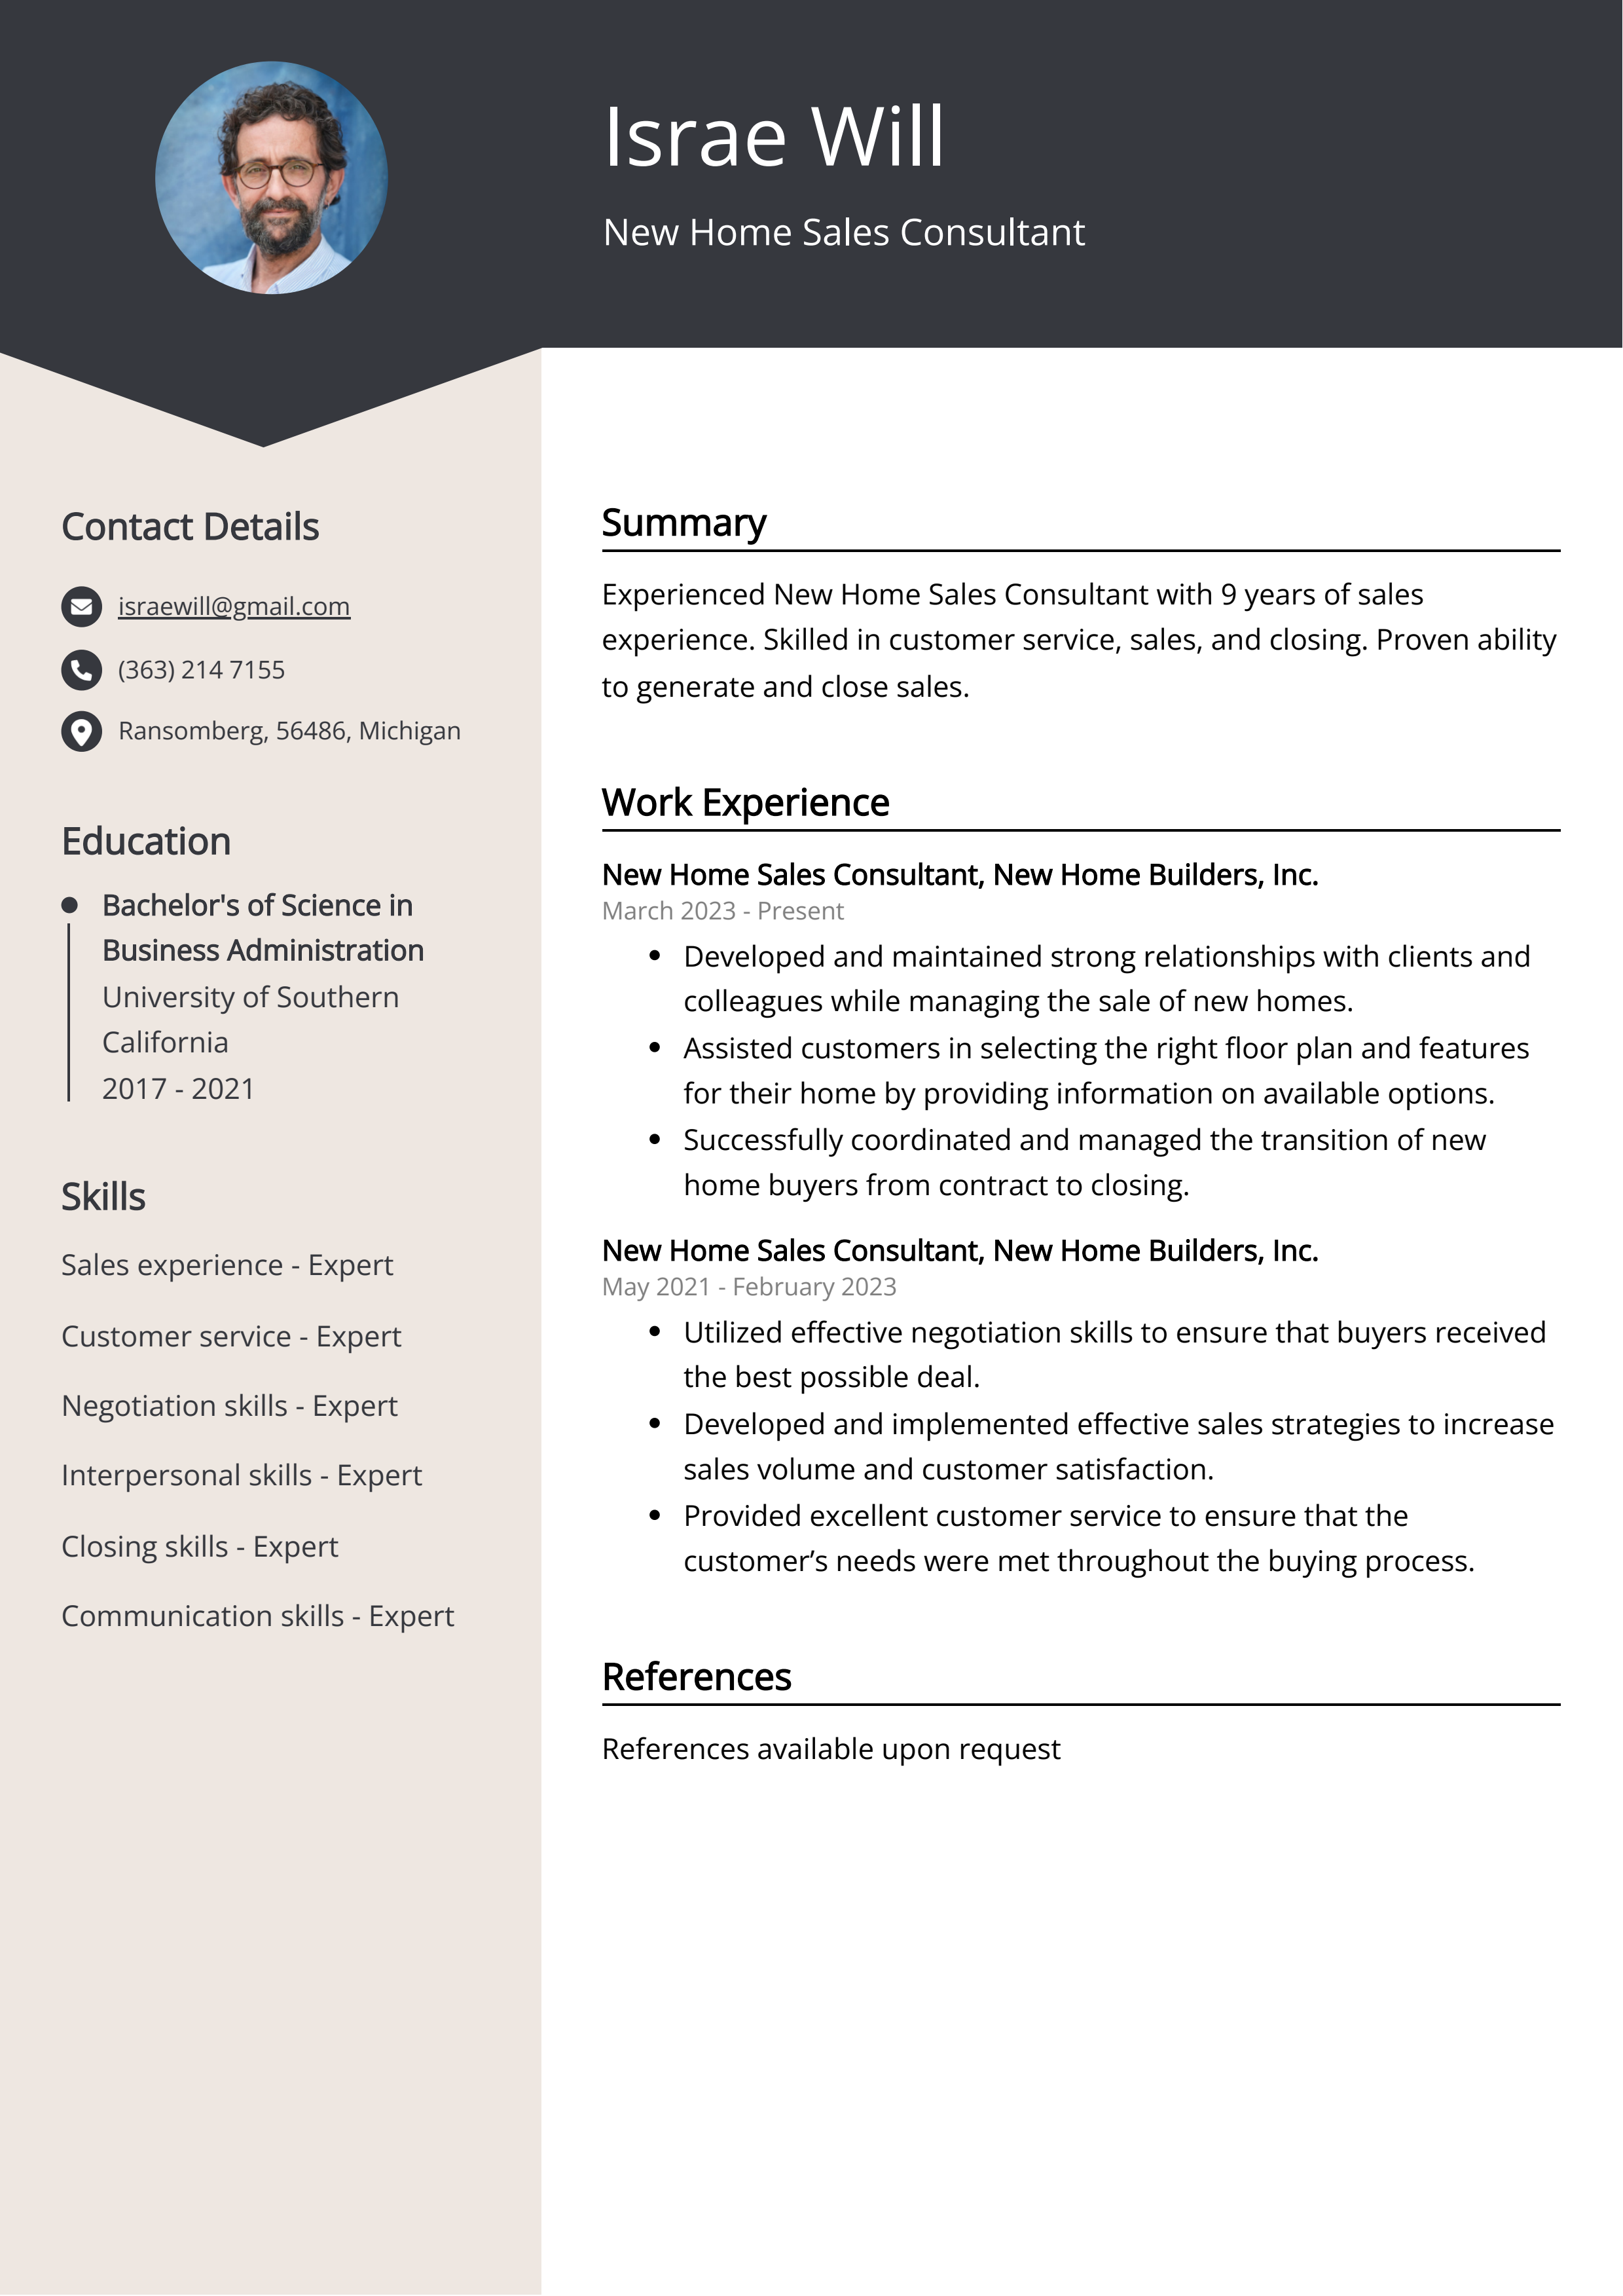 New Home Sales Consultant CV Example